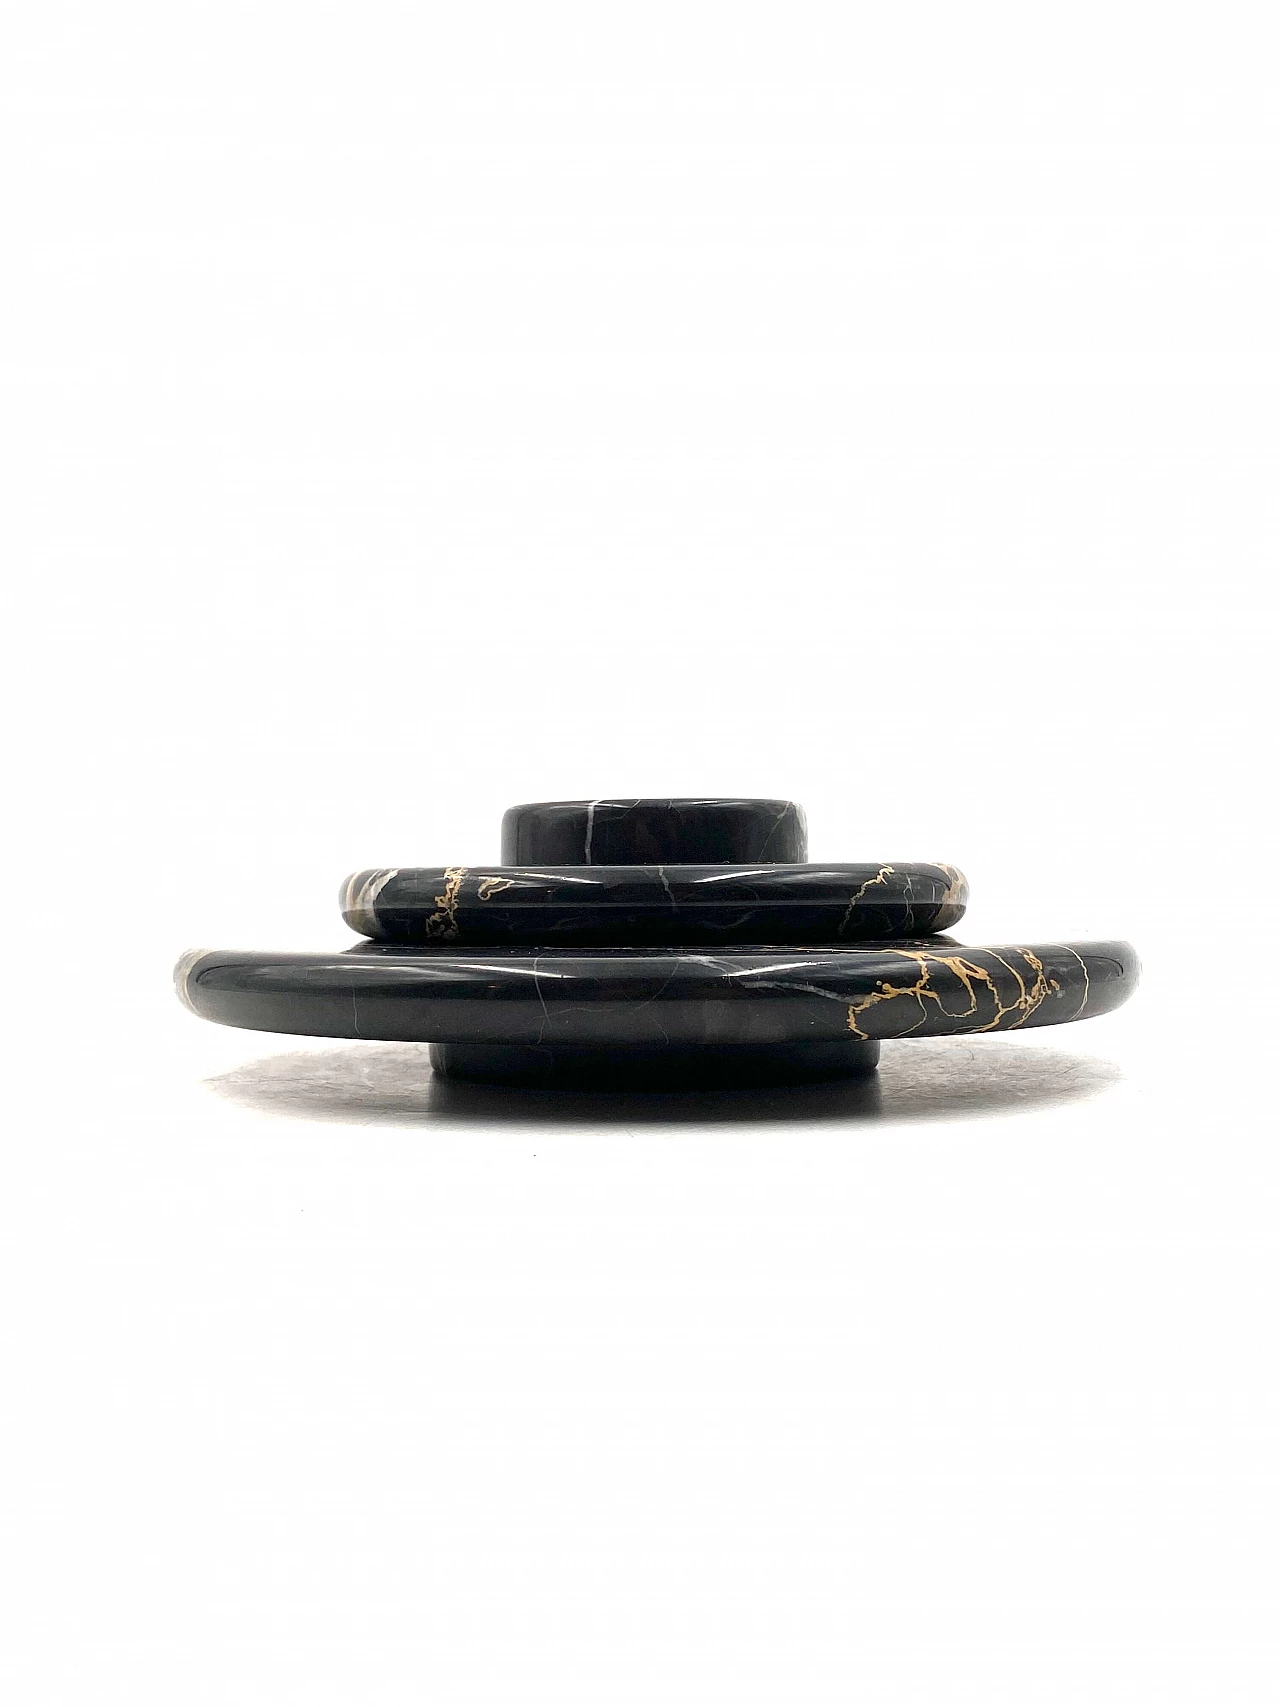 3 Stackable centerpieces in Portoro black marble by Casigliani, 1970s 6